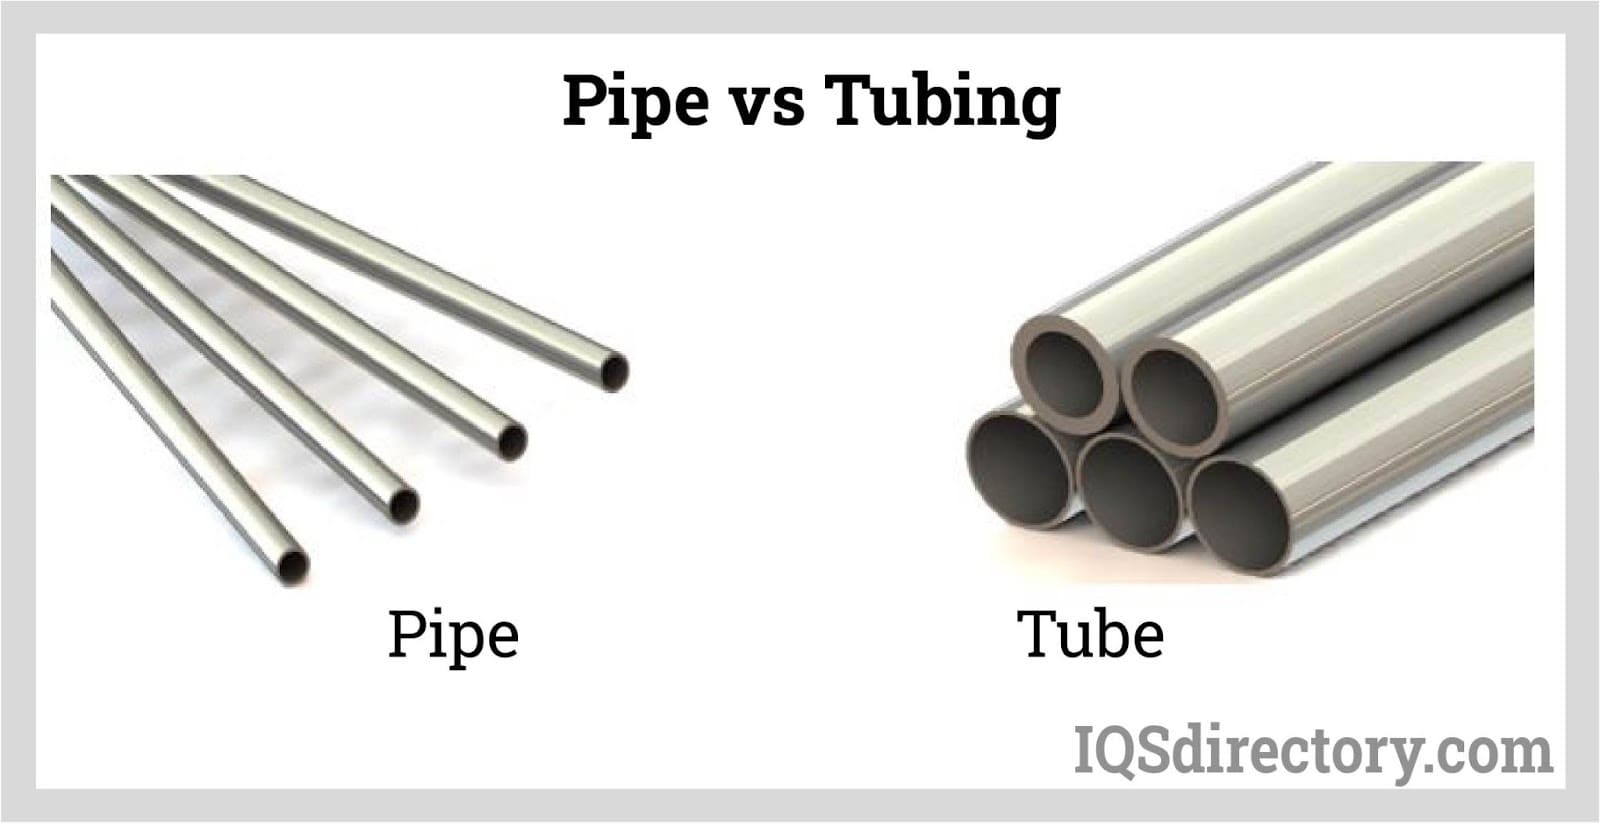 How is Stainless Steel Tube Produced?